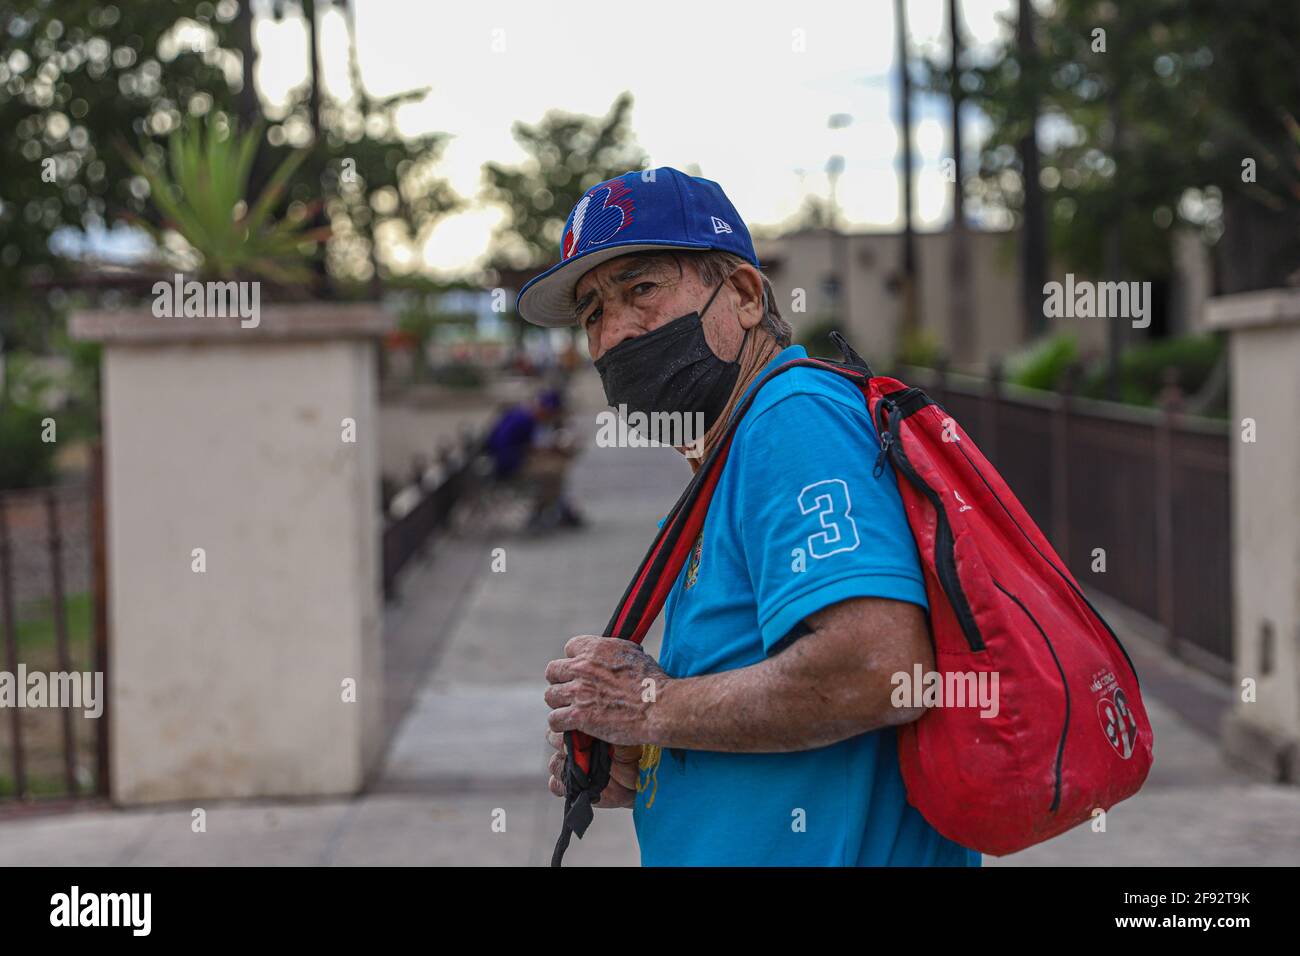 An older man wears a mask for Covid 19 and a blue cap from the defunct or  defunct Major League Baseball team, MLB, the Montreal Expos on April 15,  2021 in Hermosillo